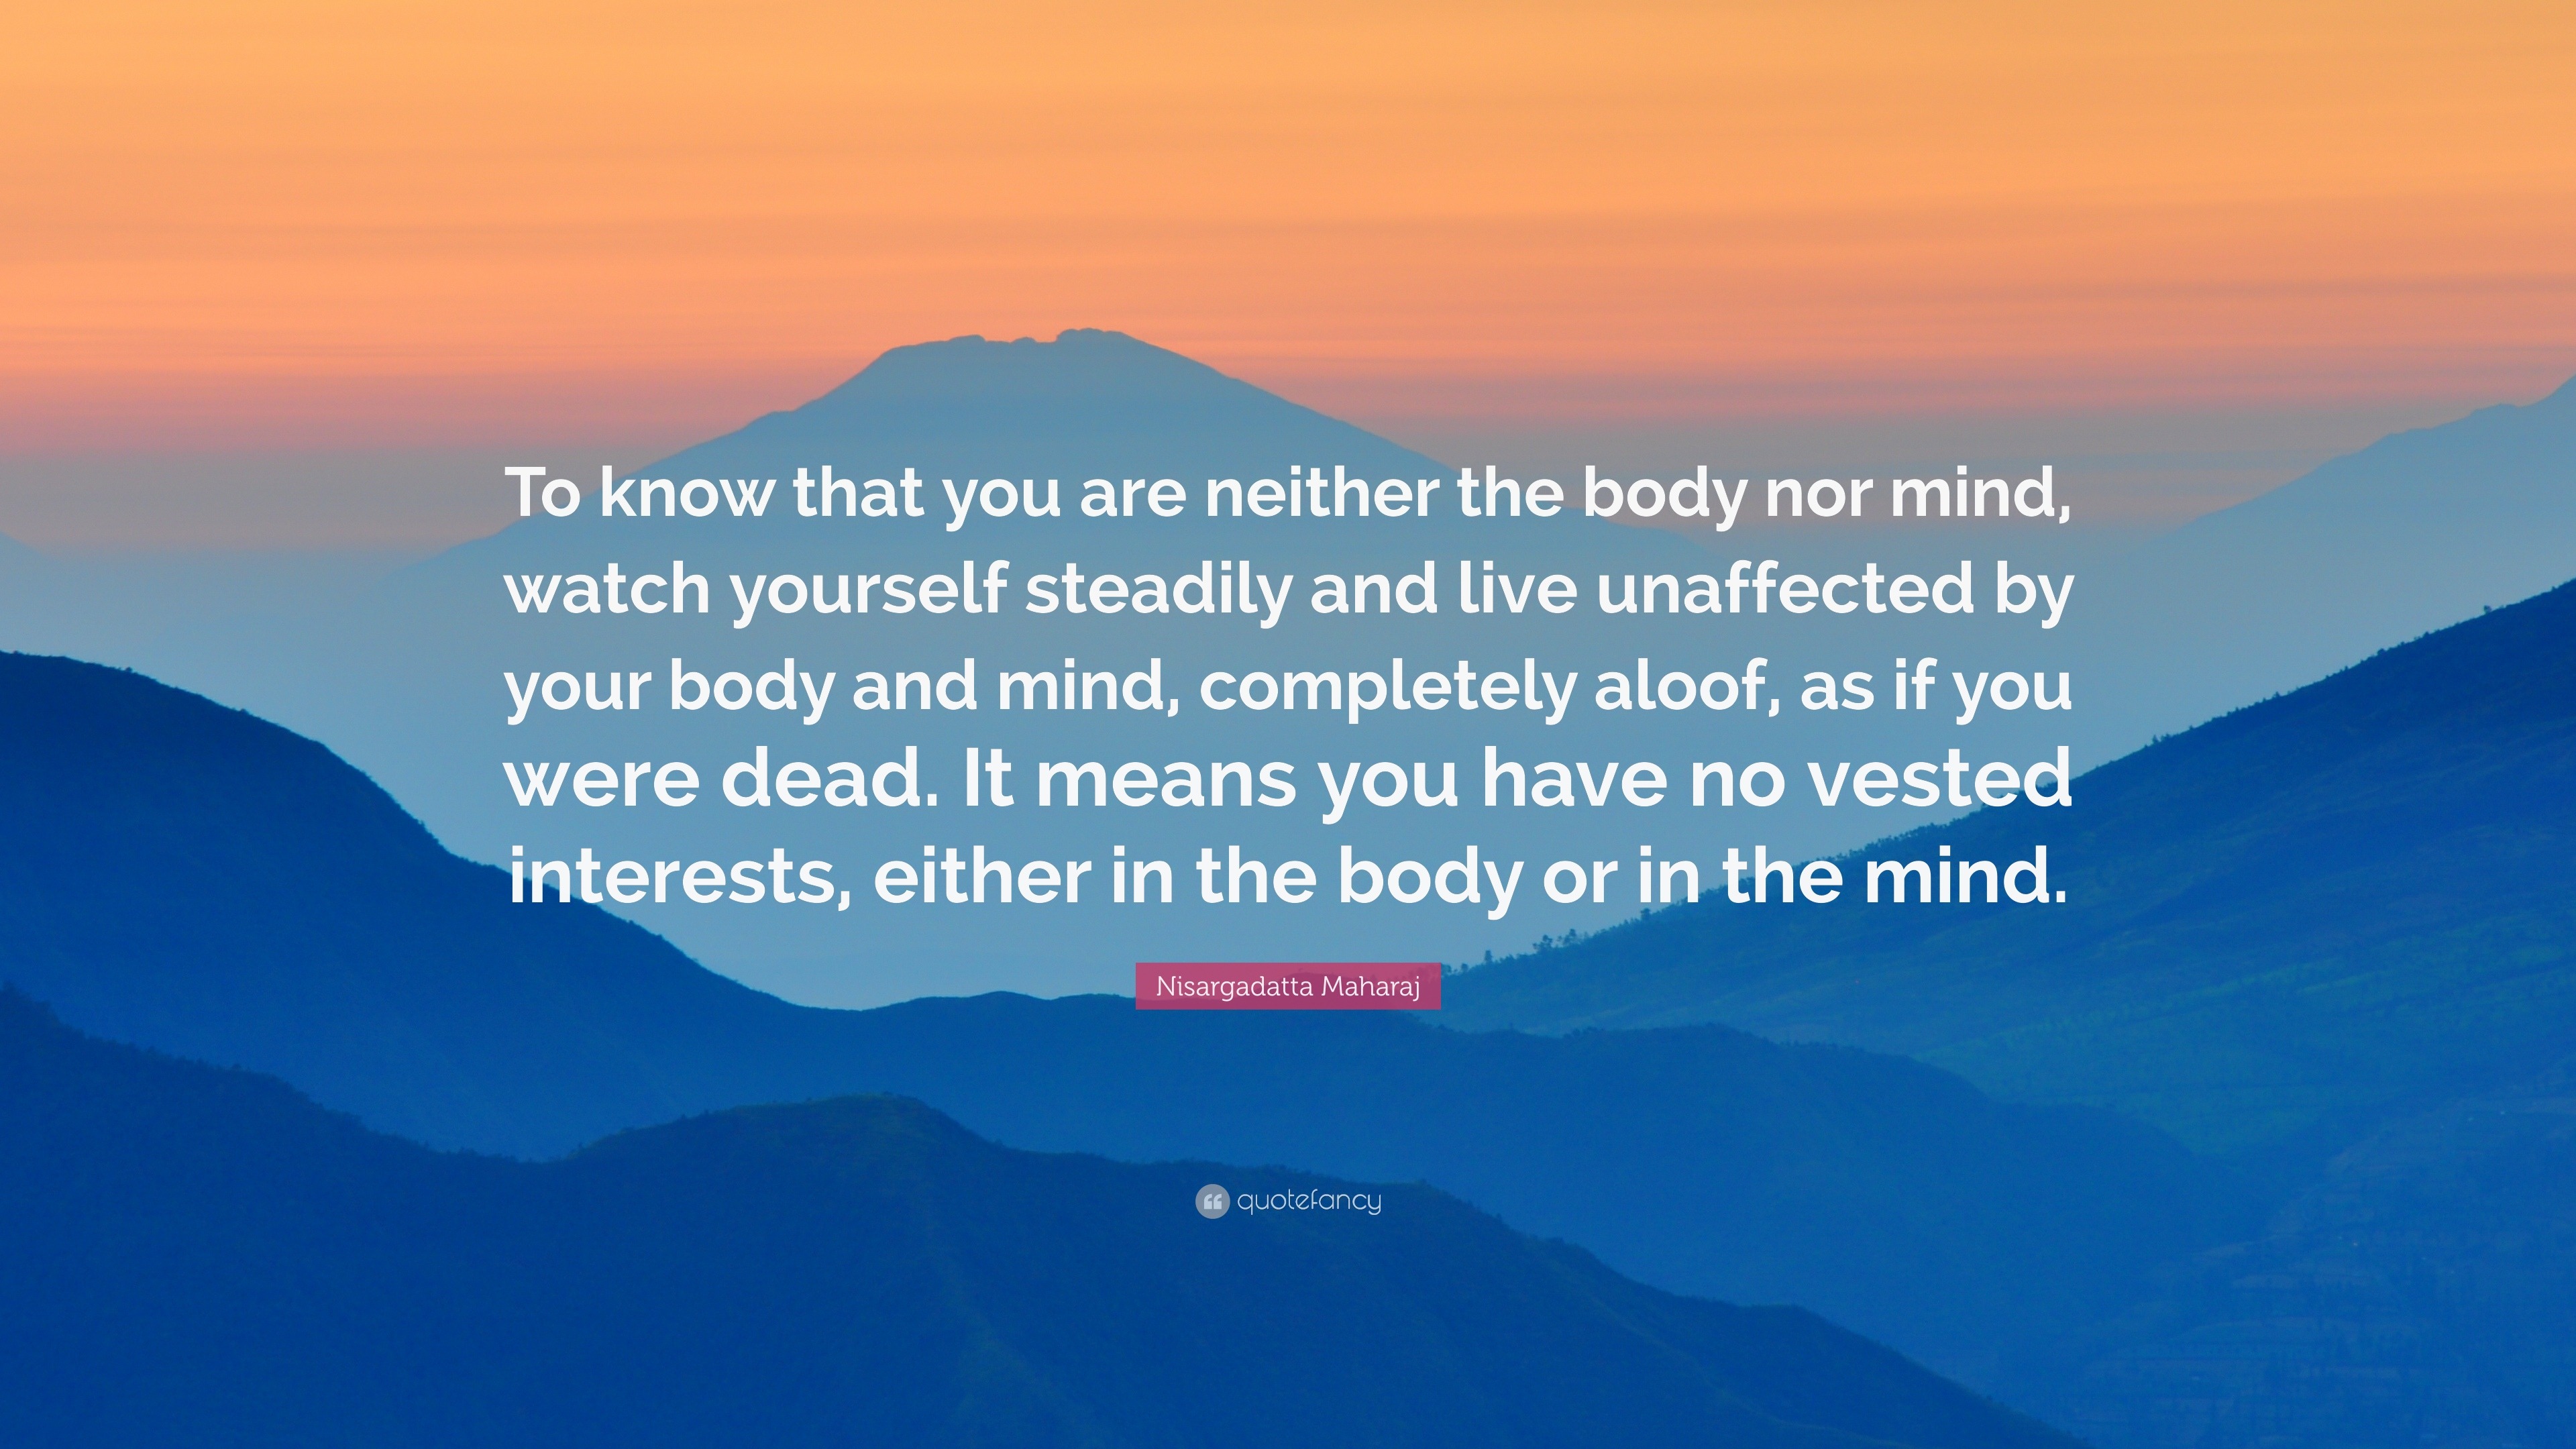 Nisargadatta Maharaj Quote: “To know that you are neither the body nor ...